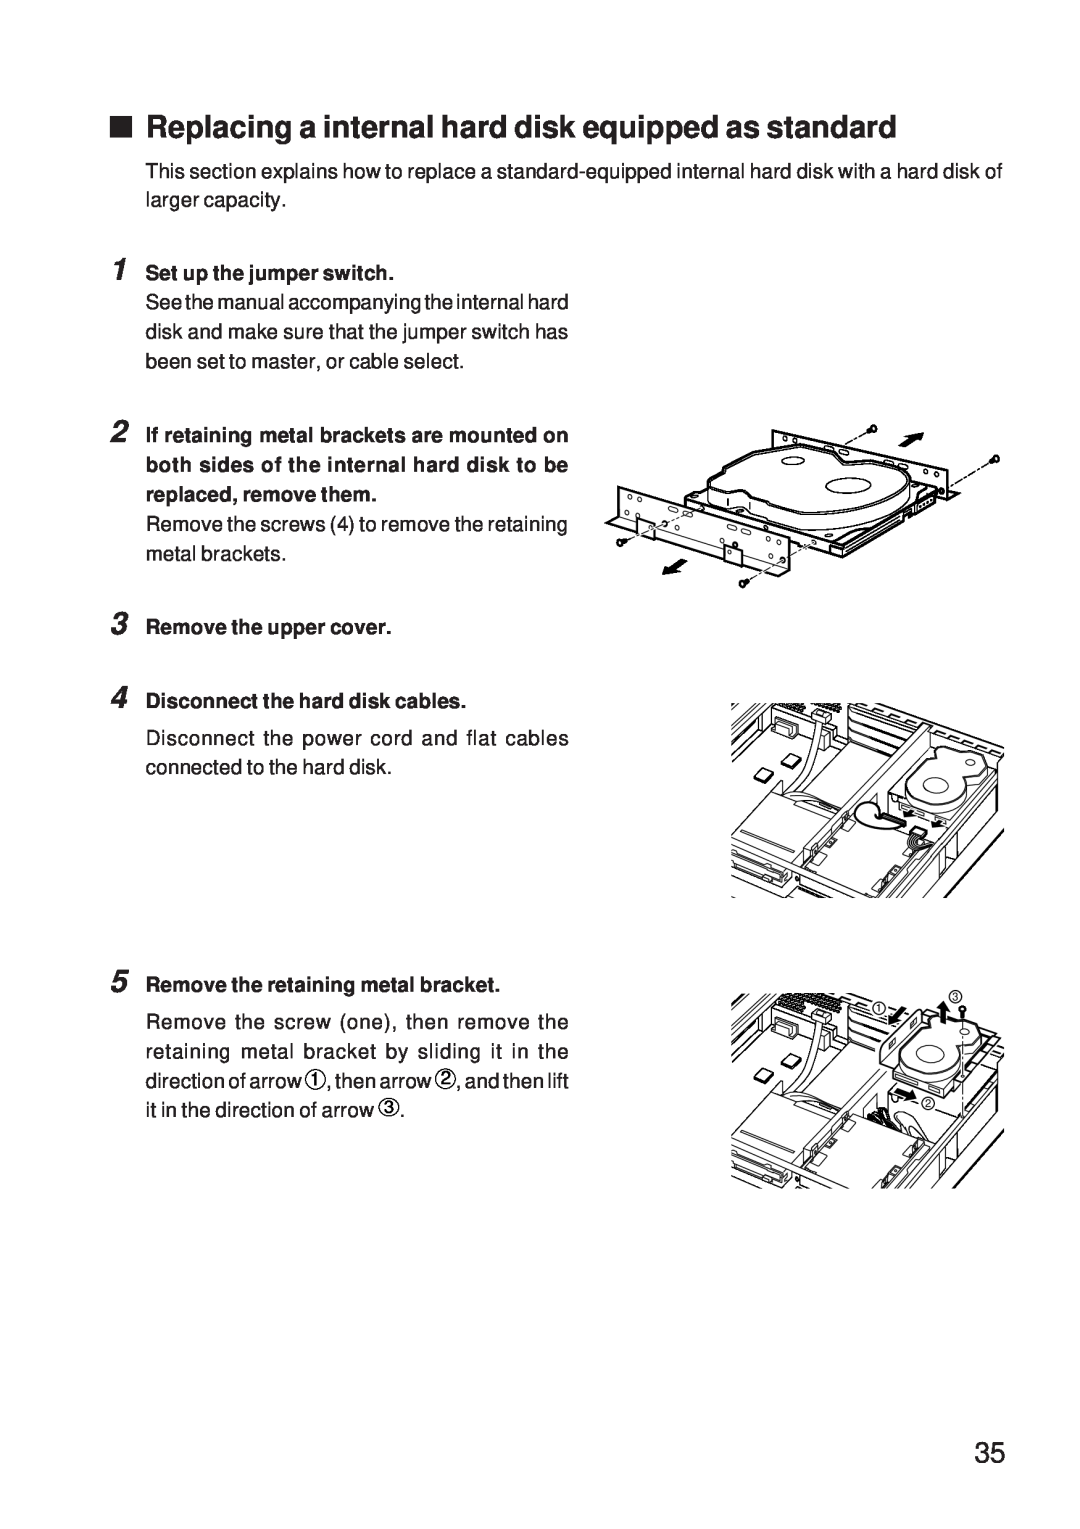 Fujitsu 5000 user manual Replacing a internal hard disk equipped as standard, Set up the jumper switch 